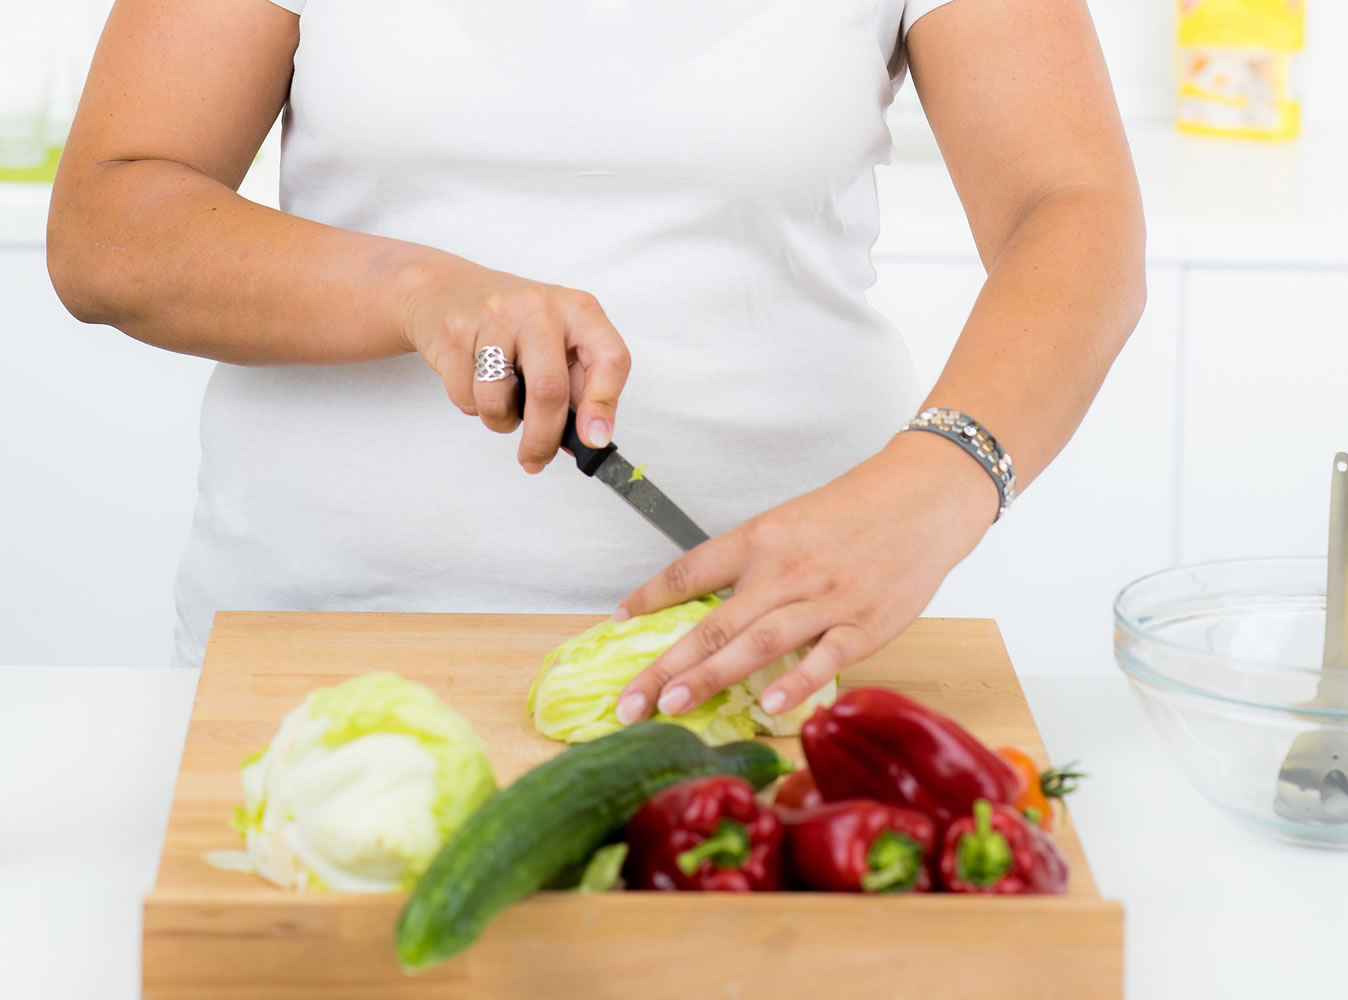 Maintaining a healthy weight can help cut risk of developing life-threatening conditions.